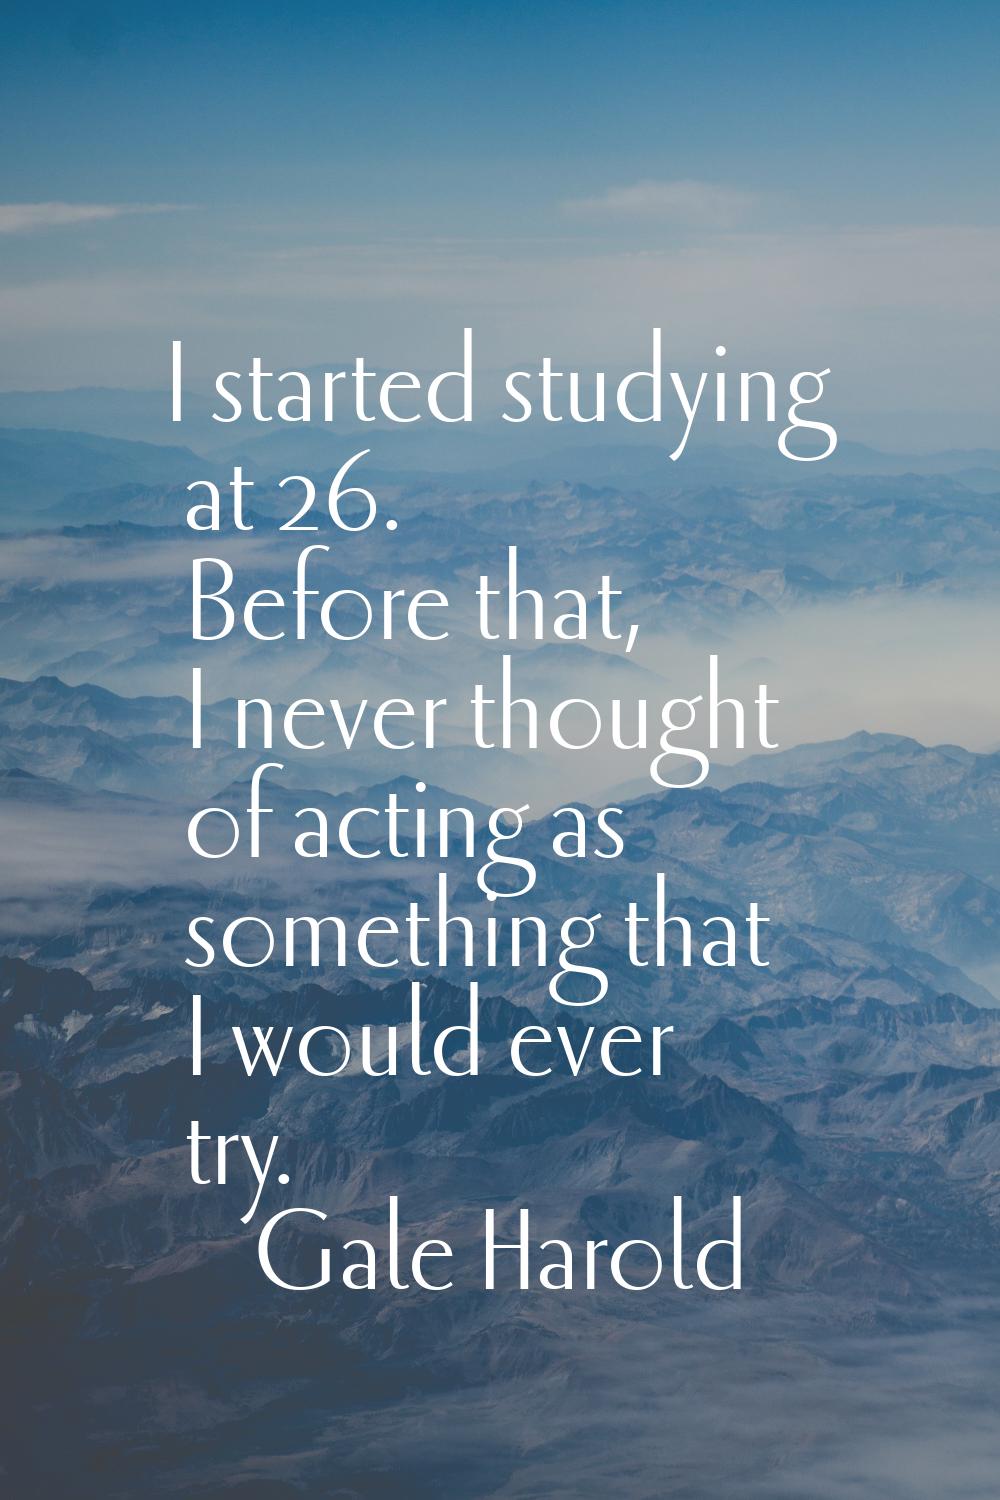 I started studying at 26. Before that, I never thought of acting as something that I would ever try